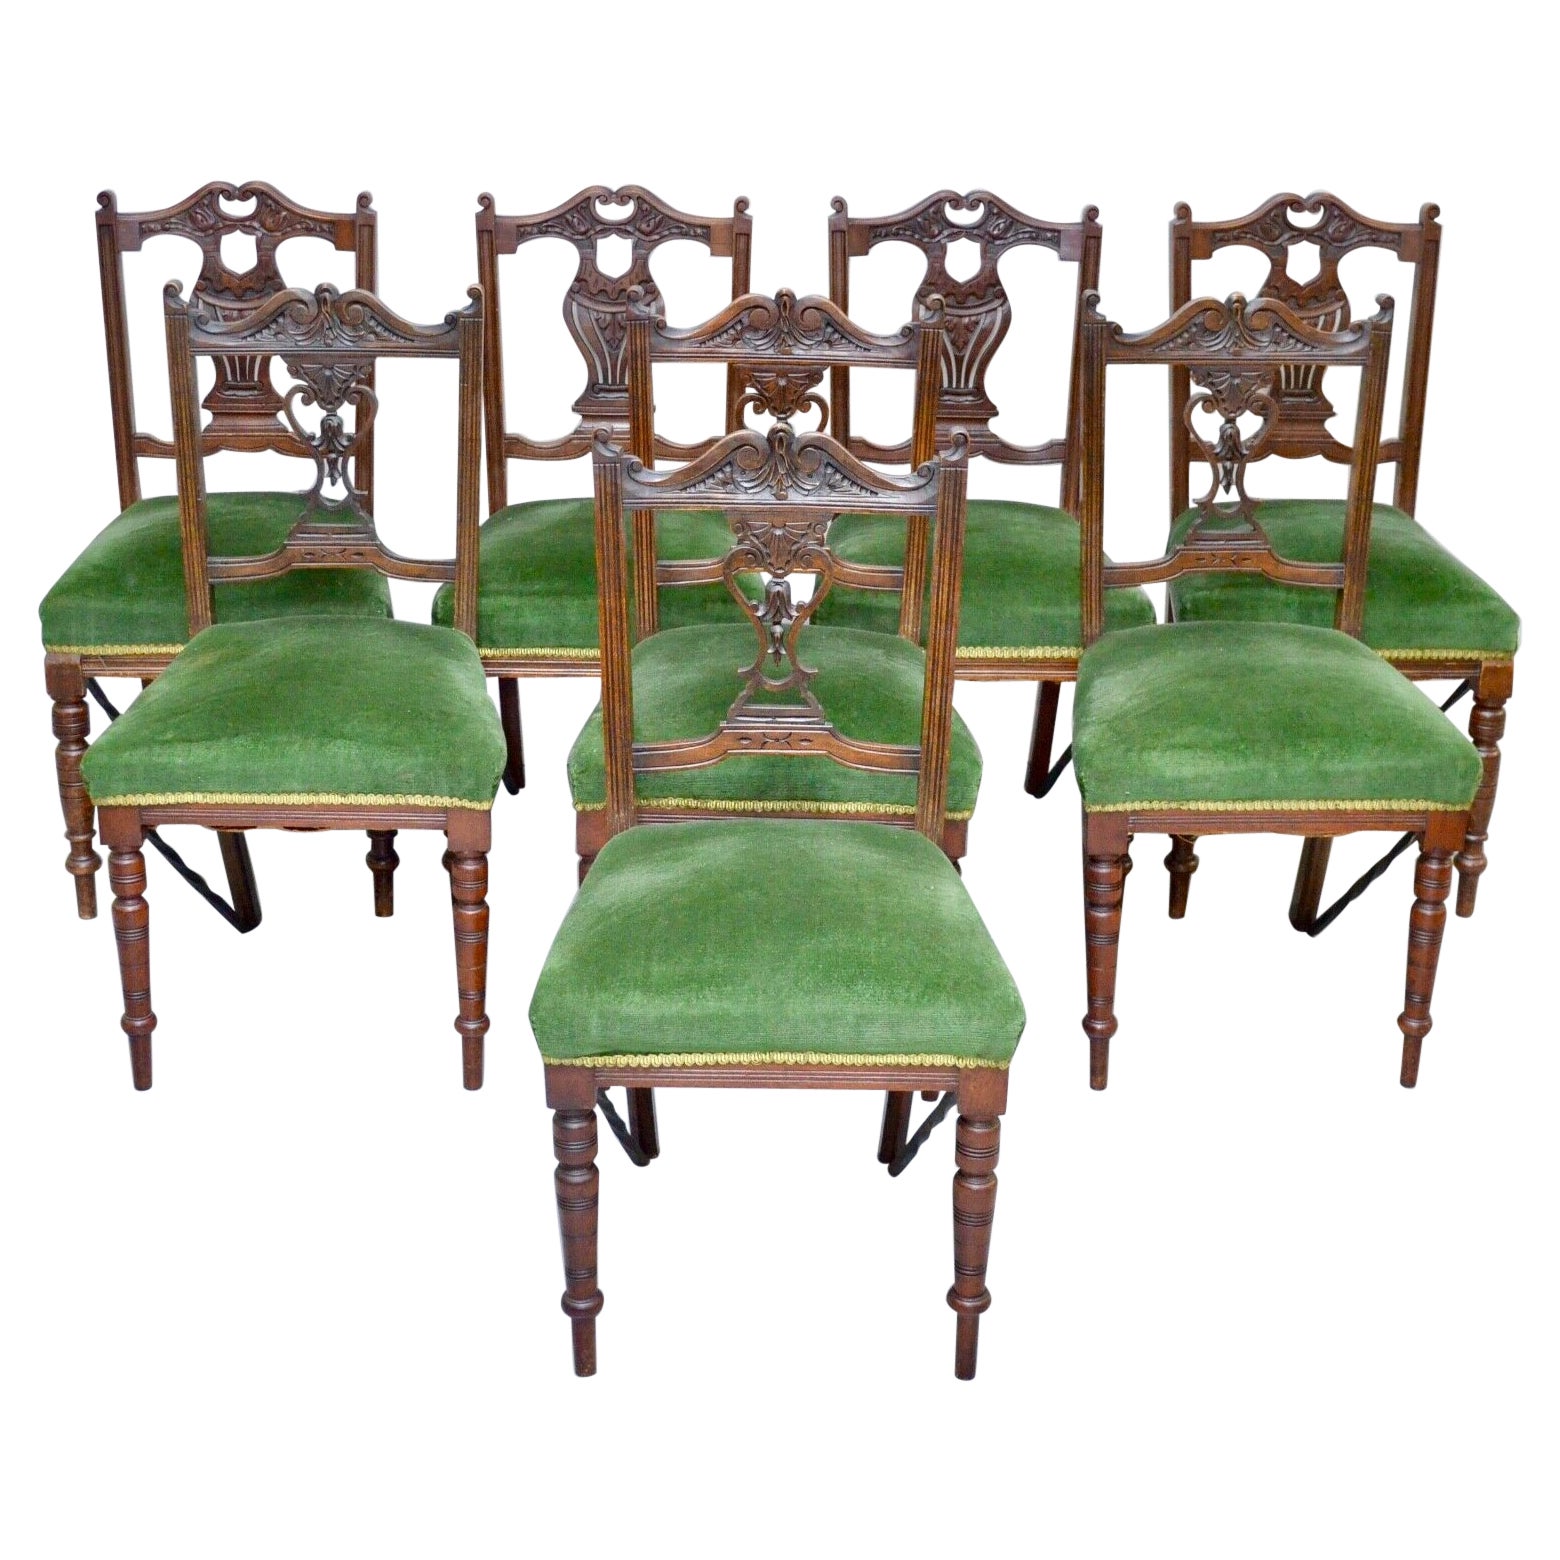 Eight Edwardian Carved Walnut Dining Chairs with Green Upholsterey